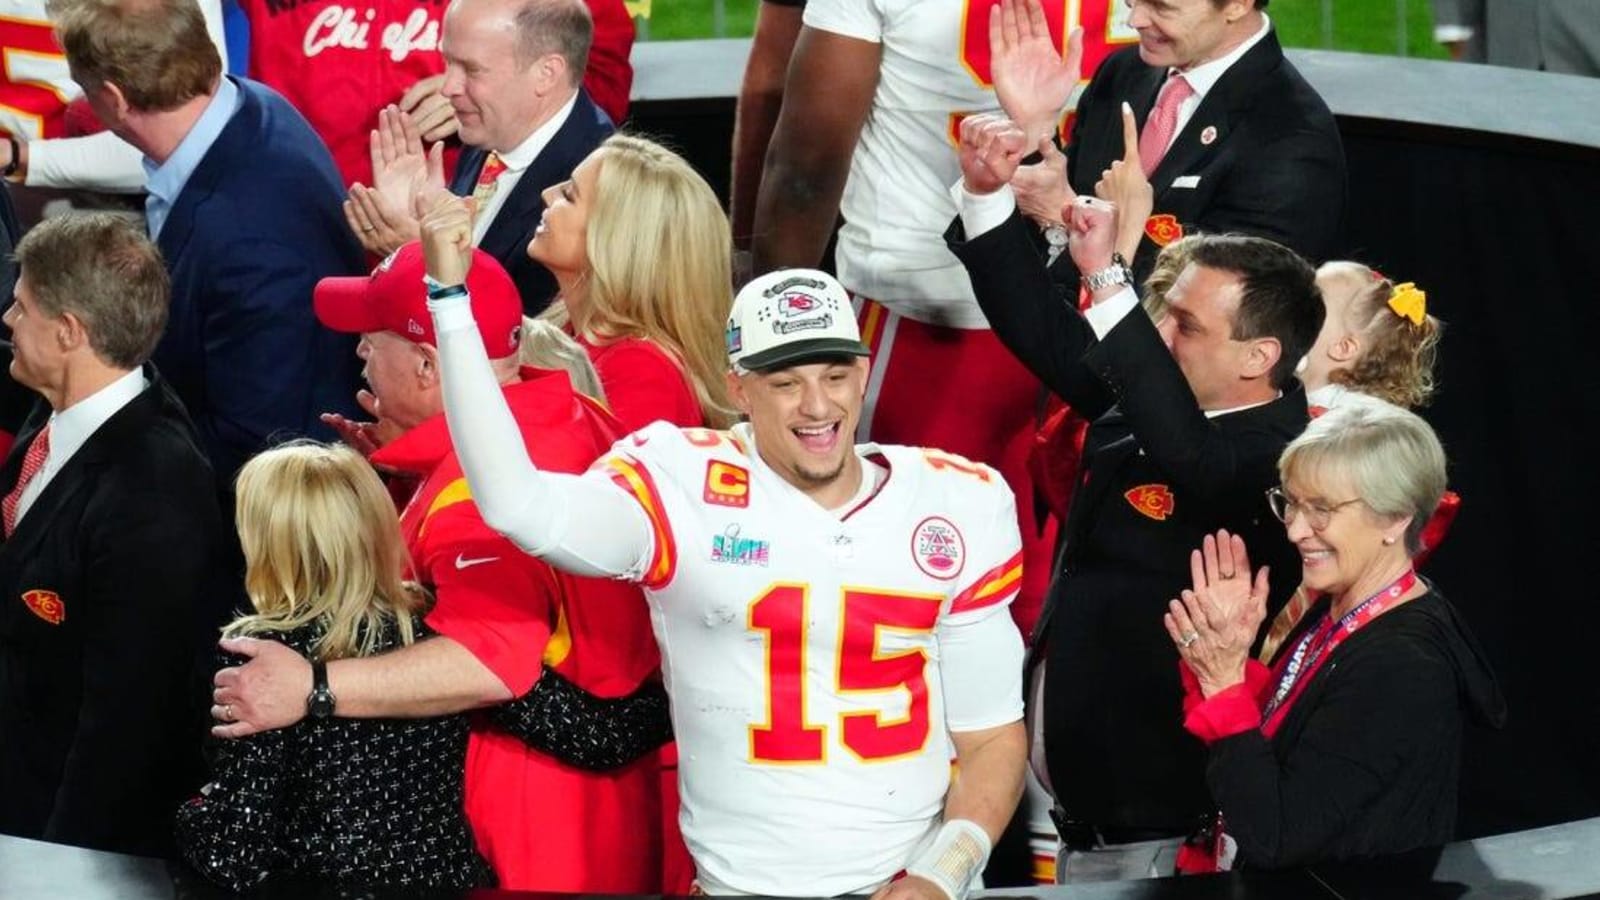 Chiefs slated as early favorites to repeat as Super Bowl champs